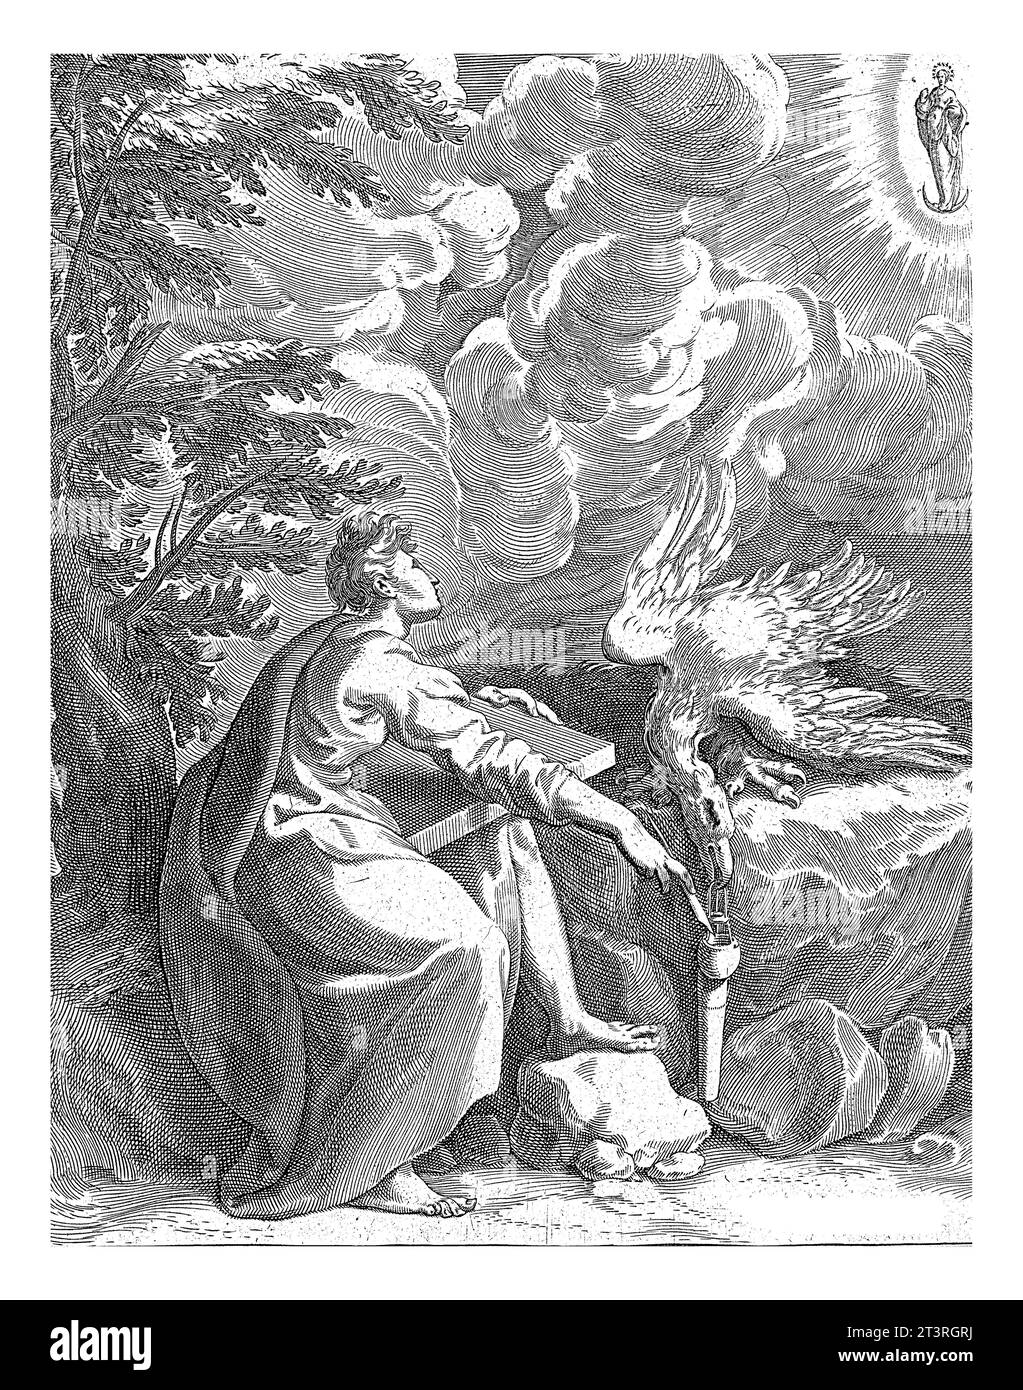 John and the eagle, Isaac Duchemin (attributed to), after Adriaan de Weerdt, 1563 - before 1590 The evangelist John sits by a tree and writes his gosp Stock Photo